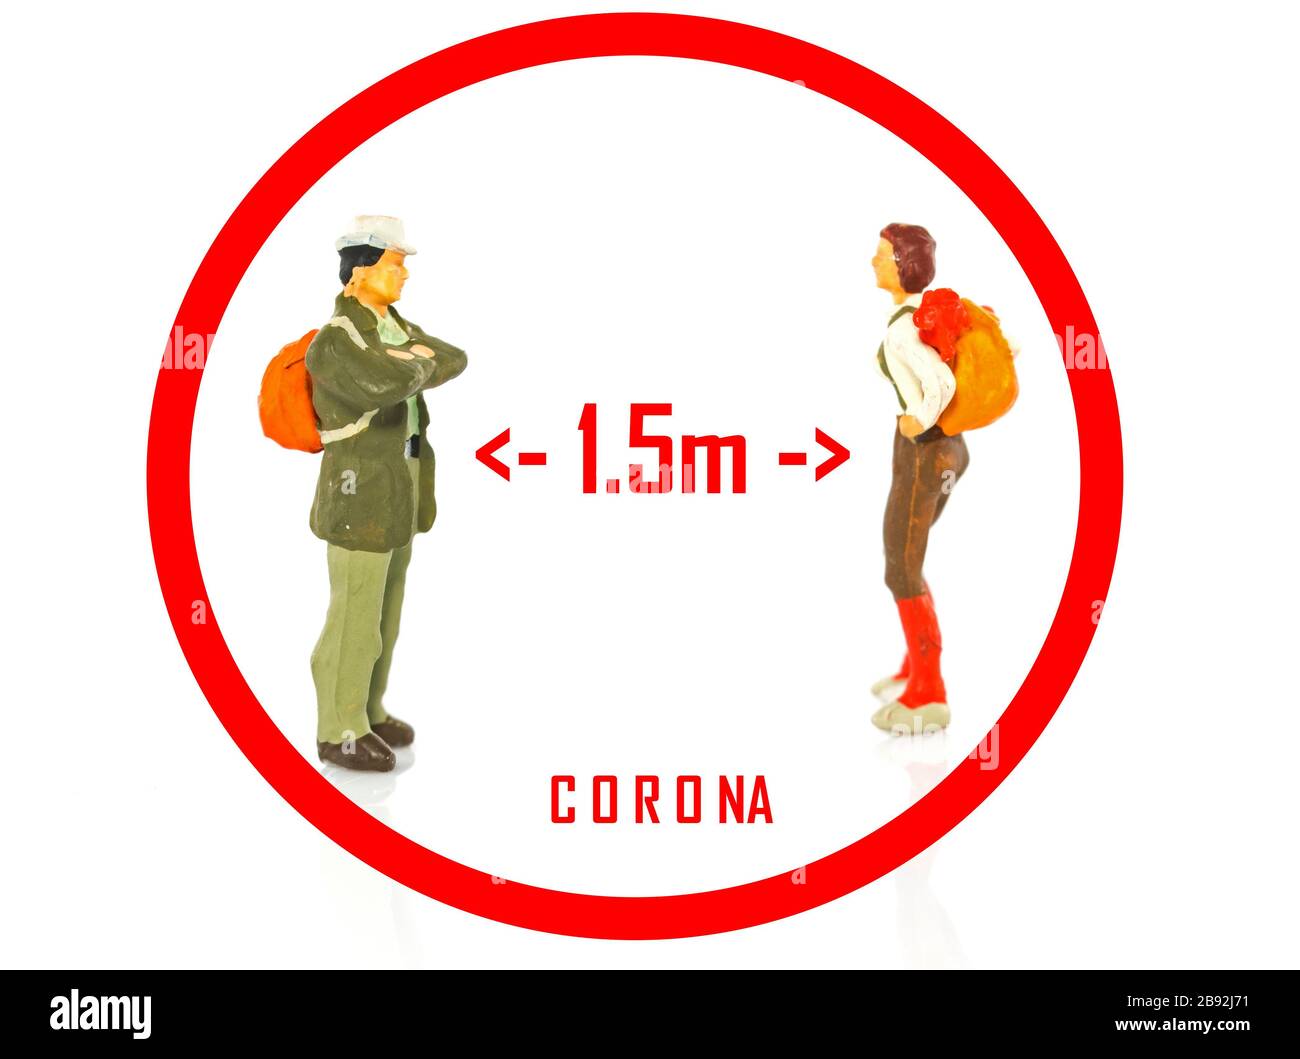 keep distance from 1. meter to protect yourself from getting corona or Covid 19 virus conceptual image Stock Photo